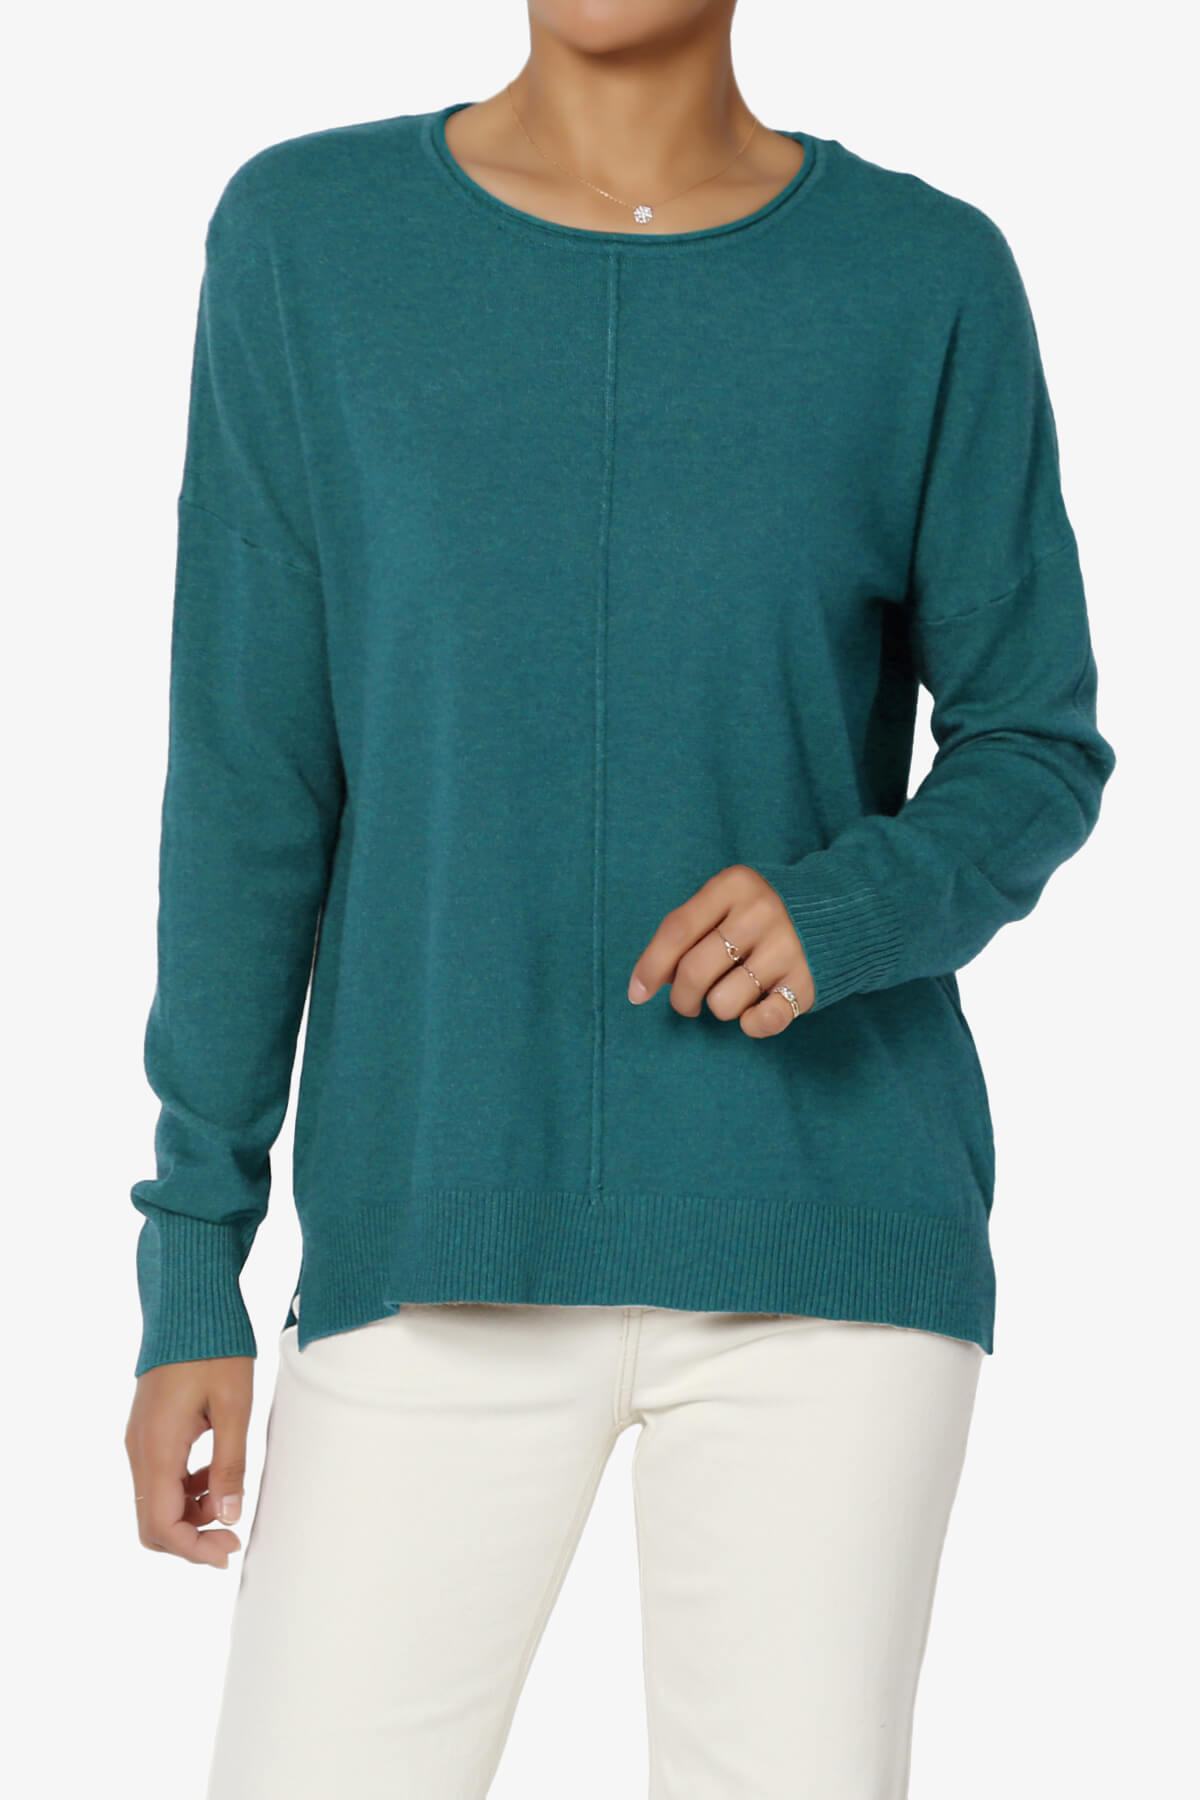 Carolina Long Sleeve Relaxed Fit Knit Top OCEAN TEAL_1